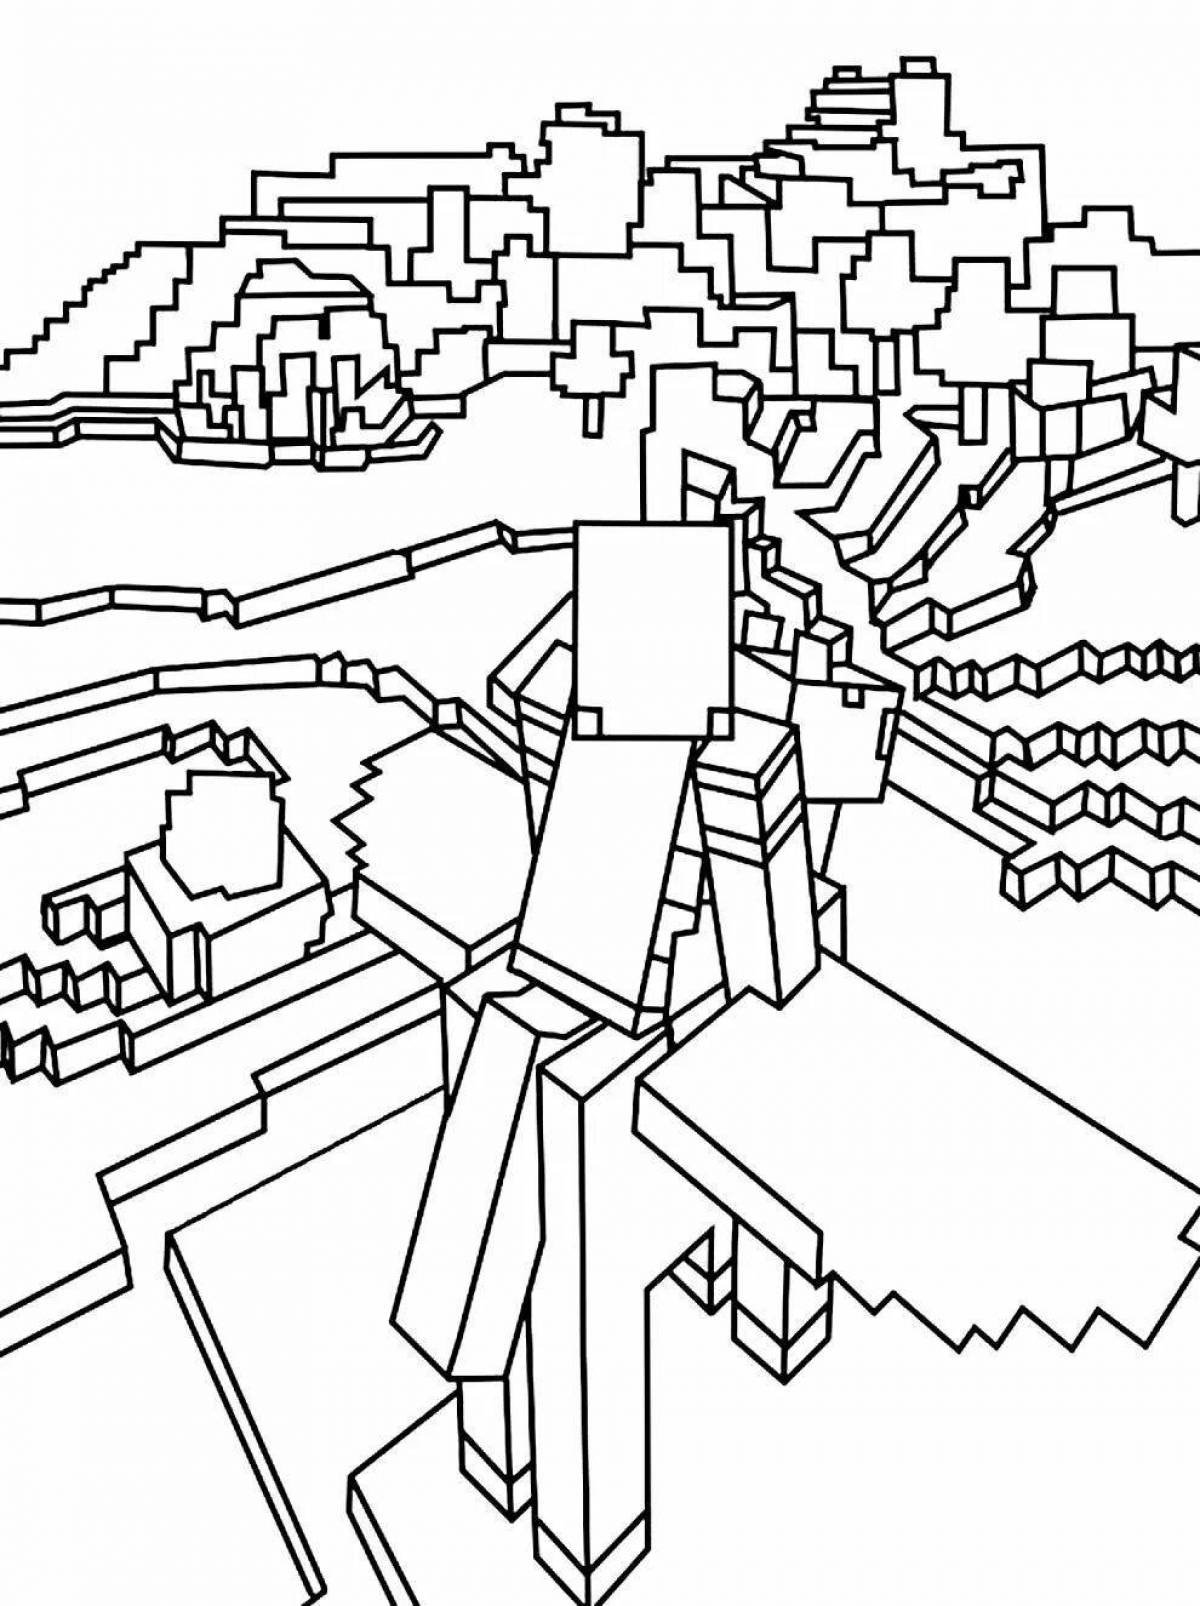 Exceptional minecraft coloring page